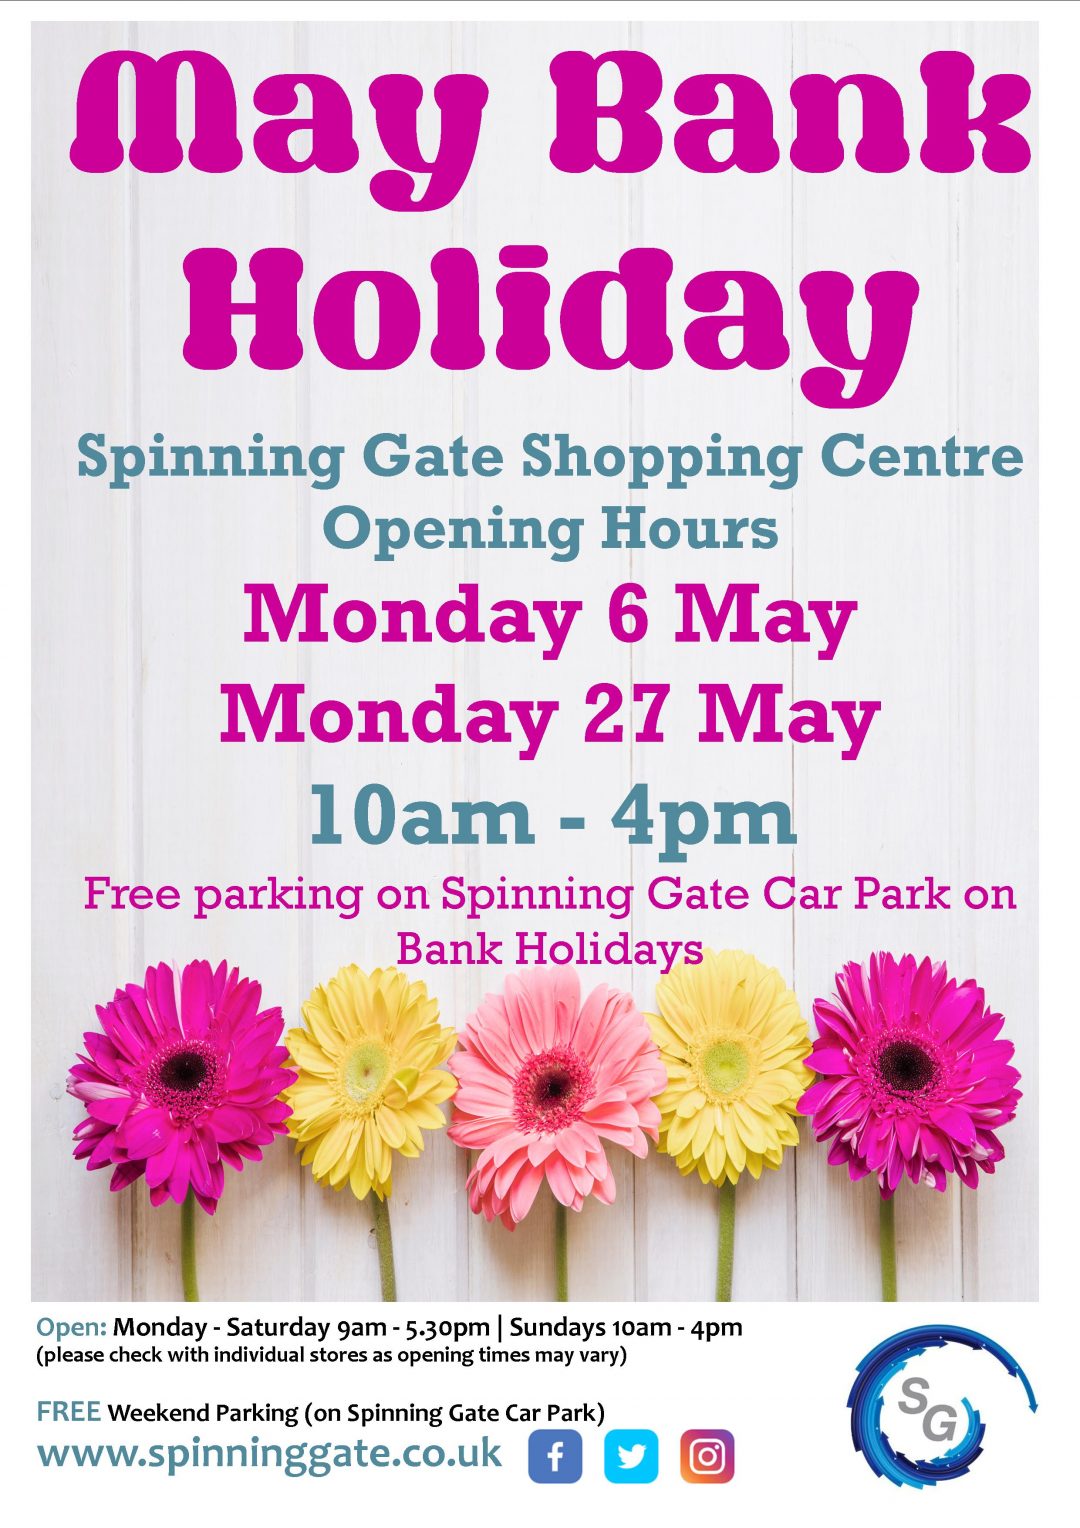 May Bank Holiday Centre Opening Hours Spinning Gate Shopping Centre